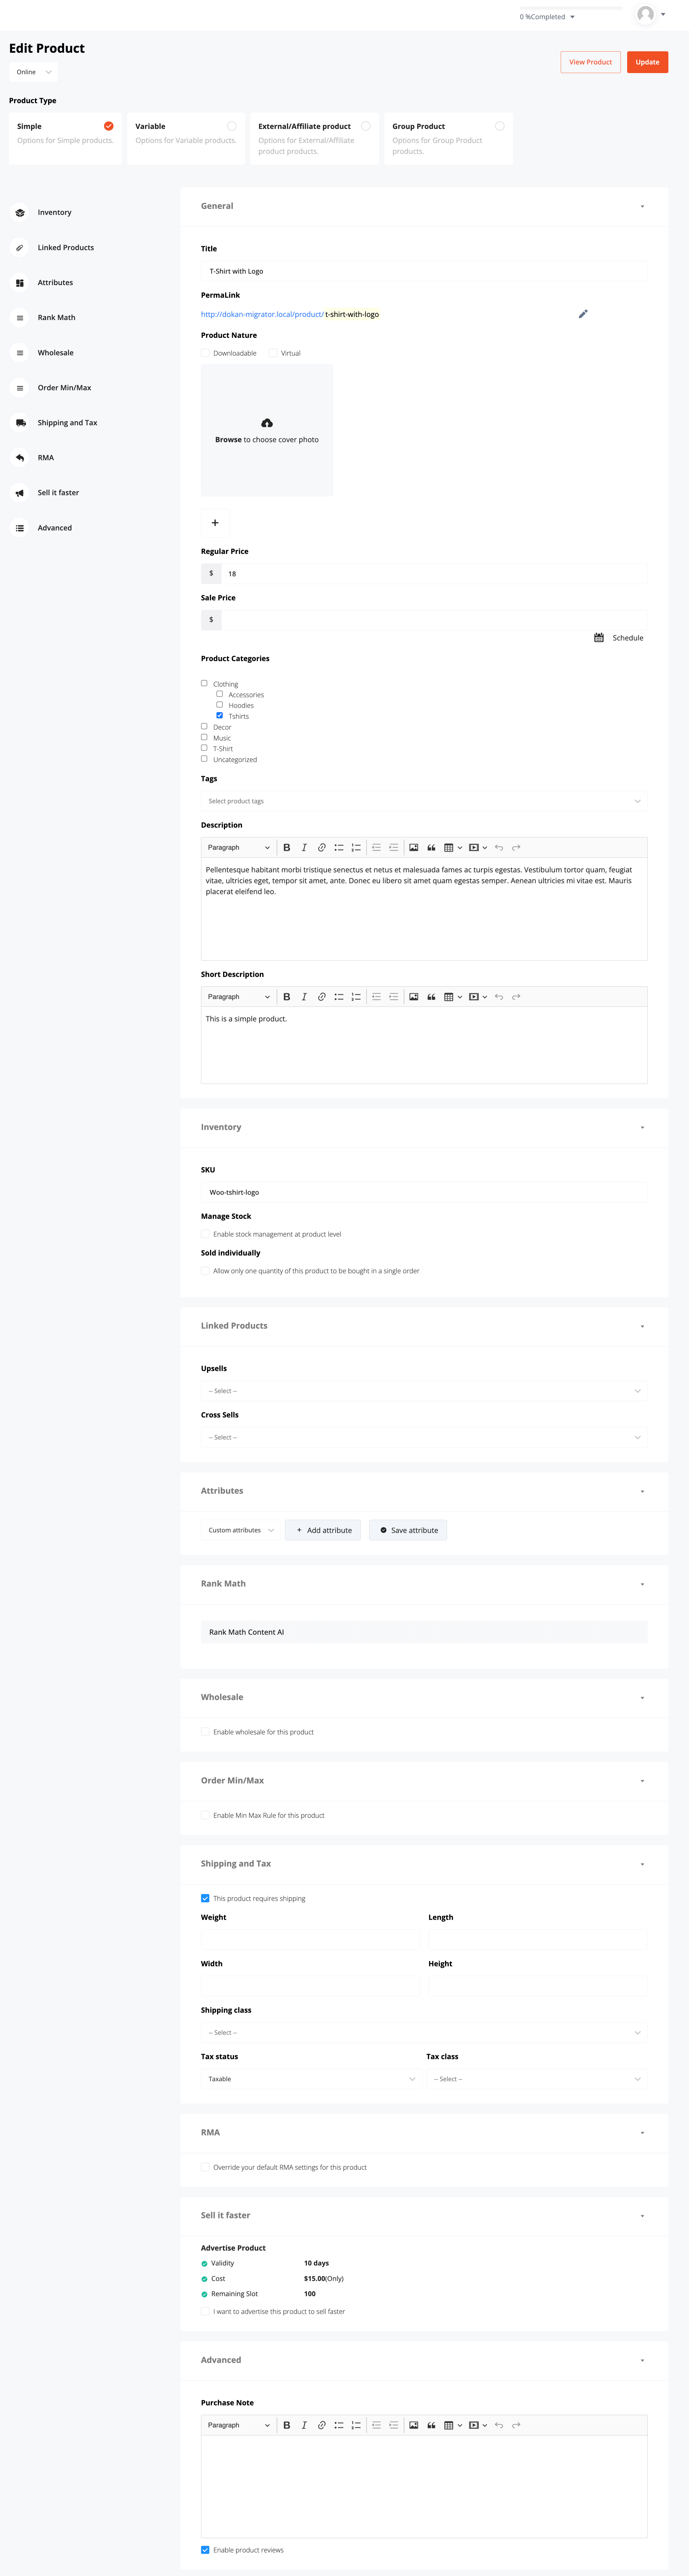 this is a screenshot of  Edit product